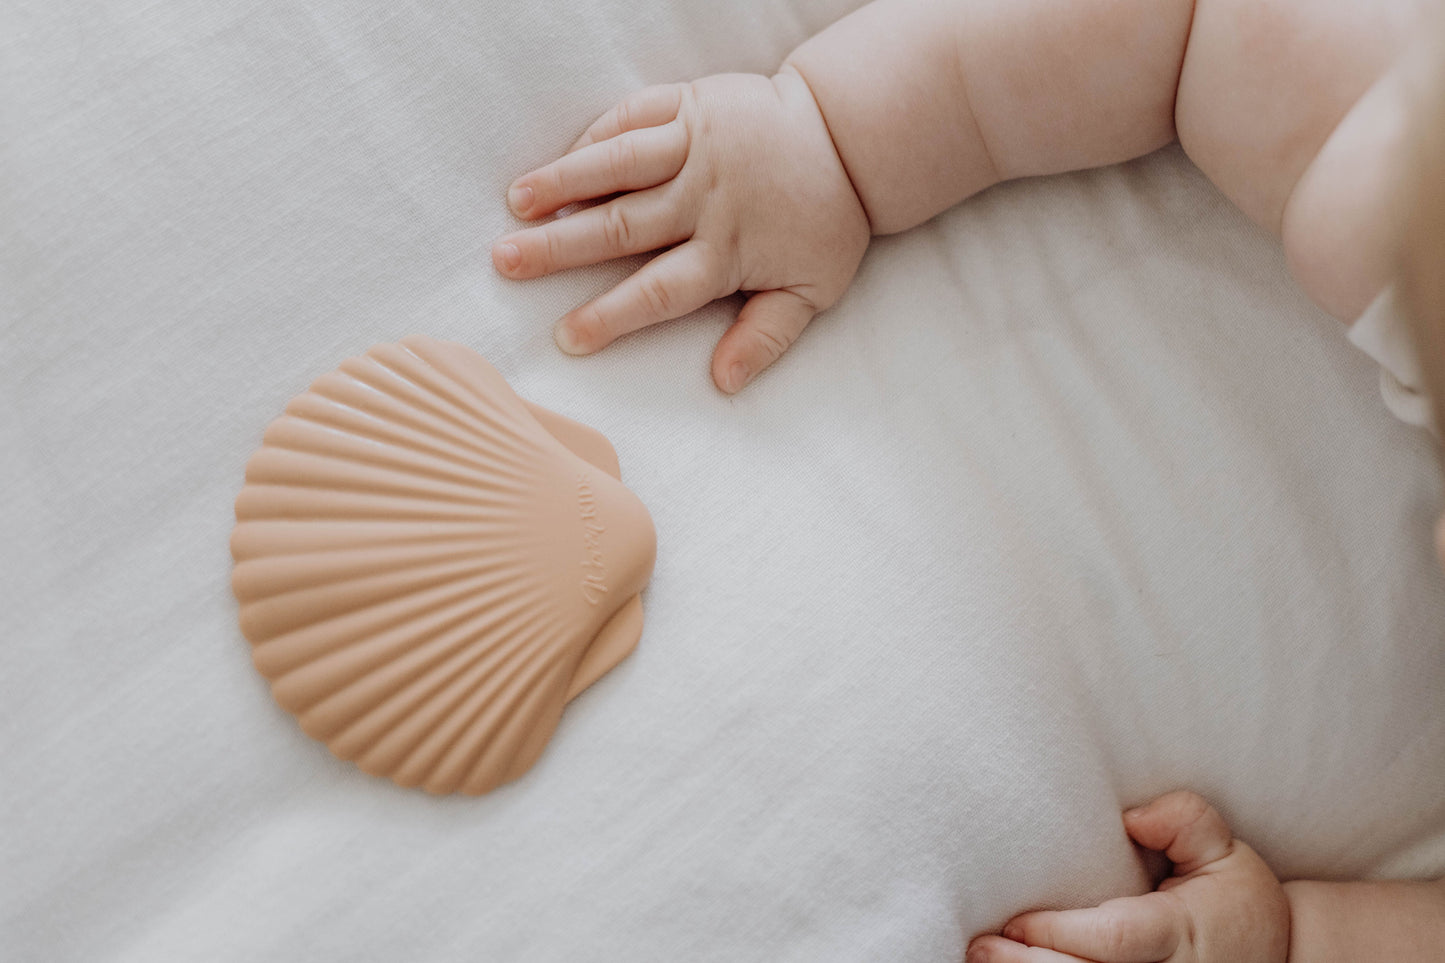 Silicone Teether - Nude Shell